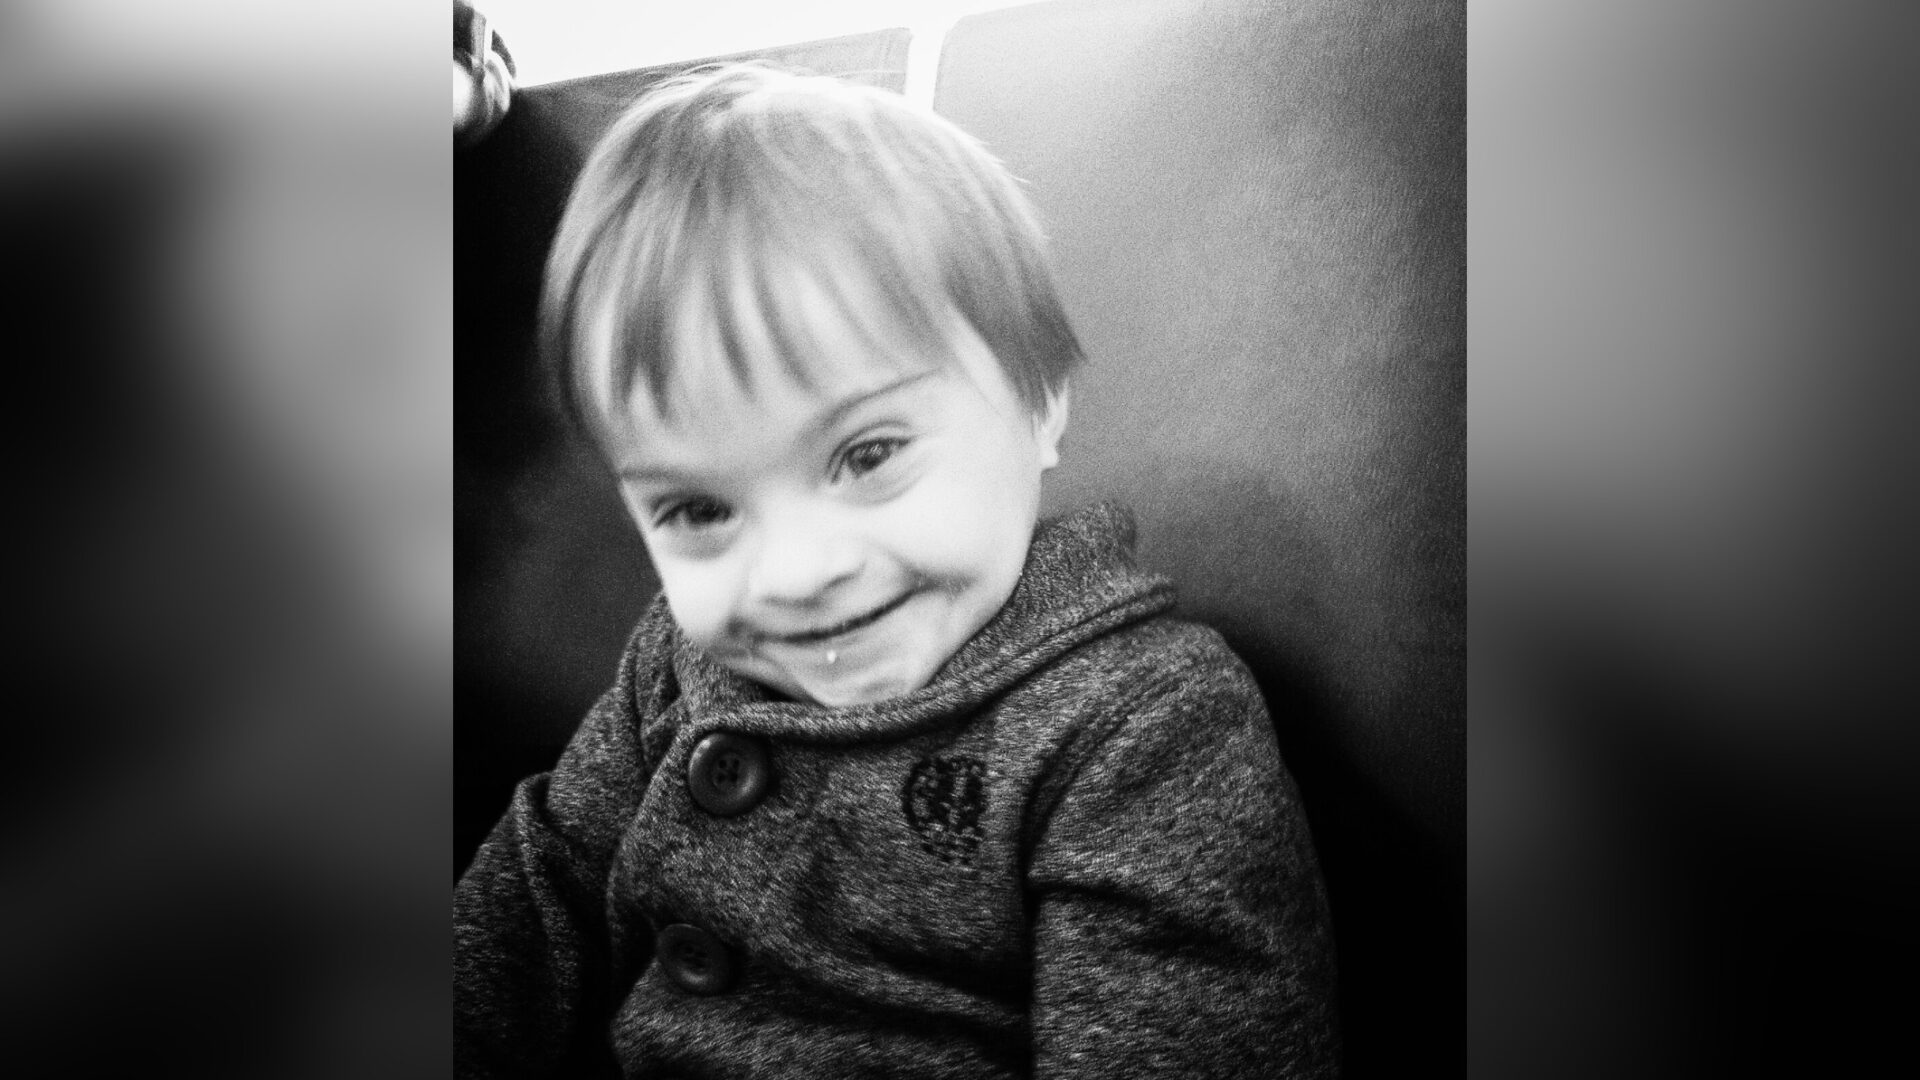 Toddler with Down syndrome smiling